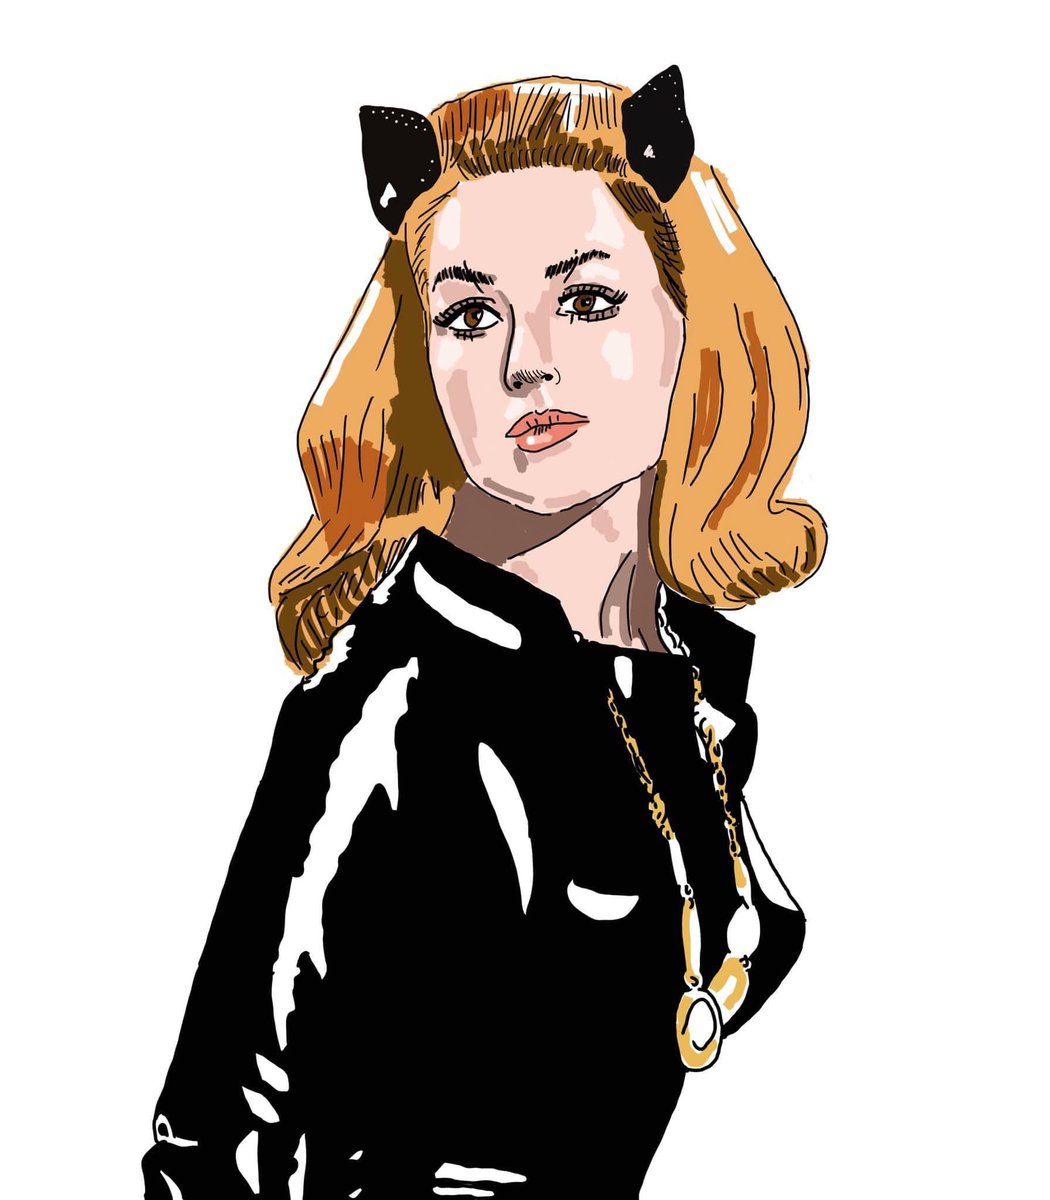 Tonya She Her On Twitter Rt Clairevgray Throwback To Sketching Julie Newmar As Cat Woman